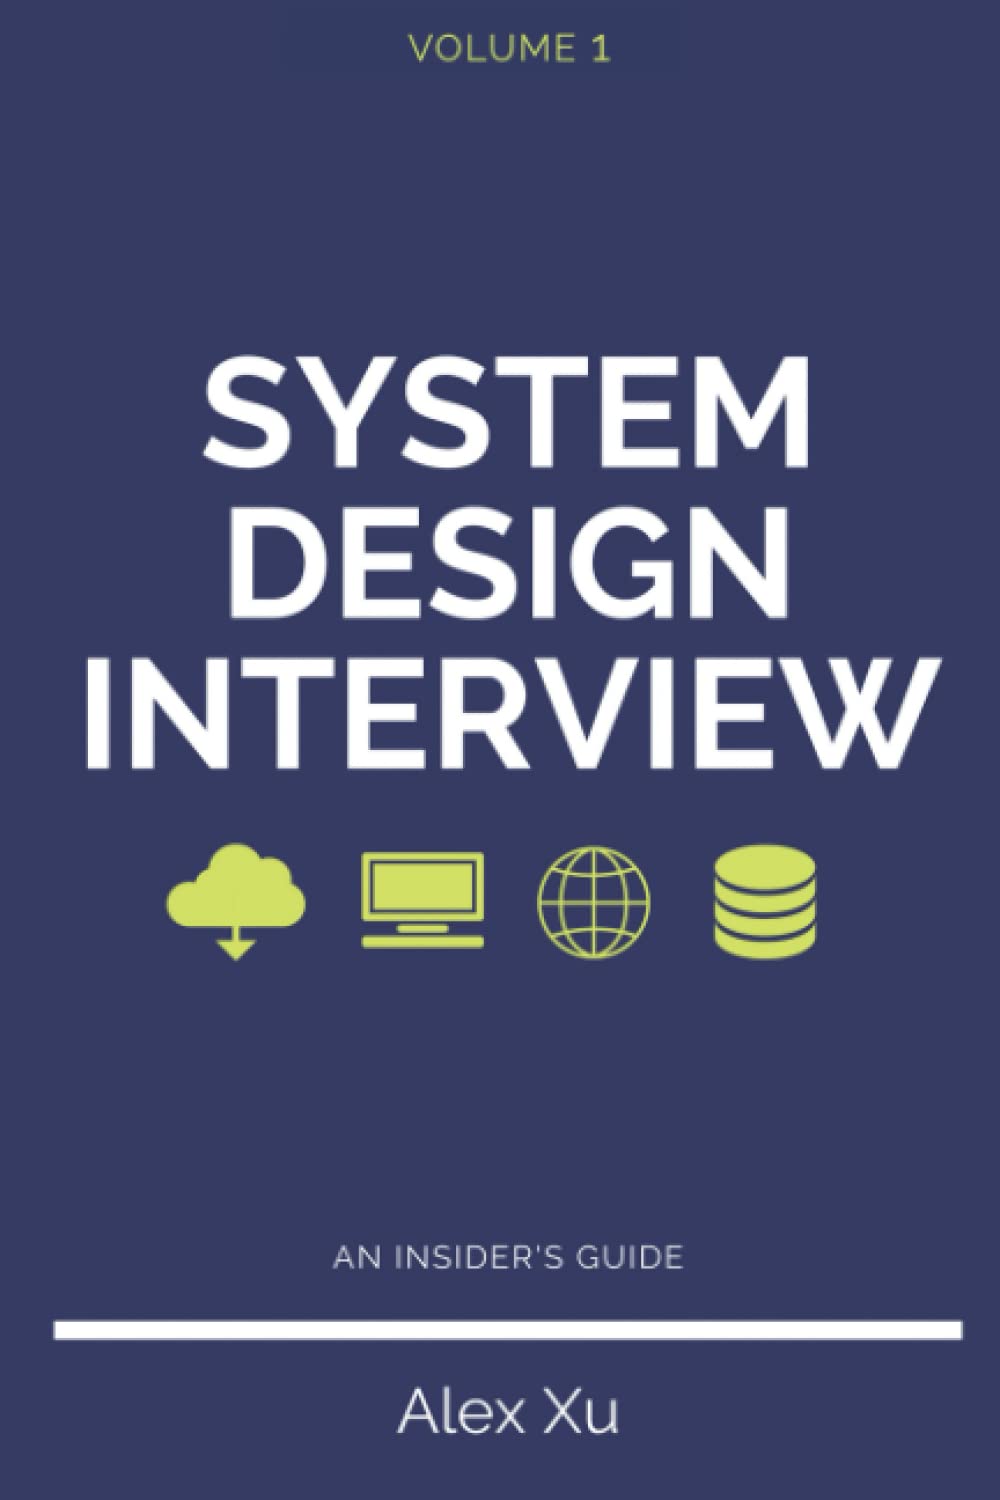 System Design Interview - Chapter 4 - Design a Rate Limiter